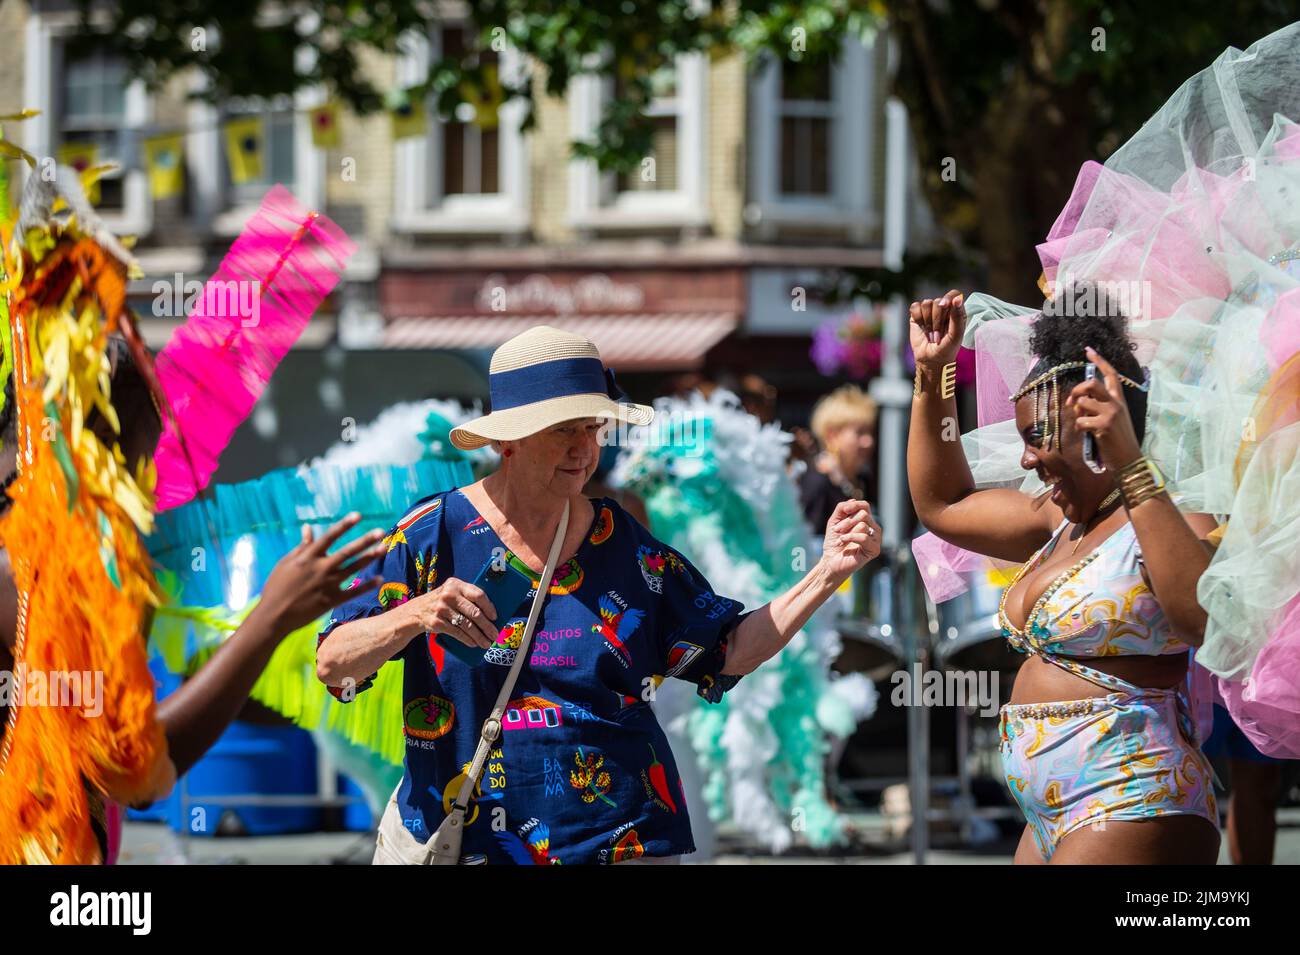 London, UK.  5 August 2022. A member of the public joins in with members of Funatiks costumes performing at Carnival in Chelsea, a community event showcasing carnival costumes, music and culture ahead of Notting Hill Carnival.  The show is part of this year’s Kensington & Chelsea Festival.  Credit: Stephen Chung / Alamy Live News Stock Photo